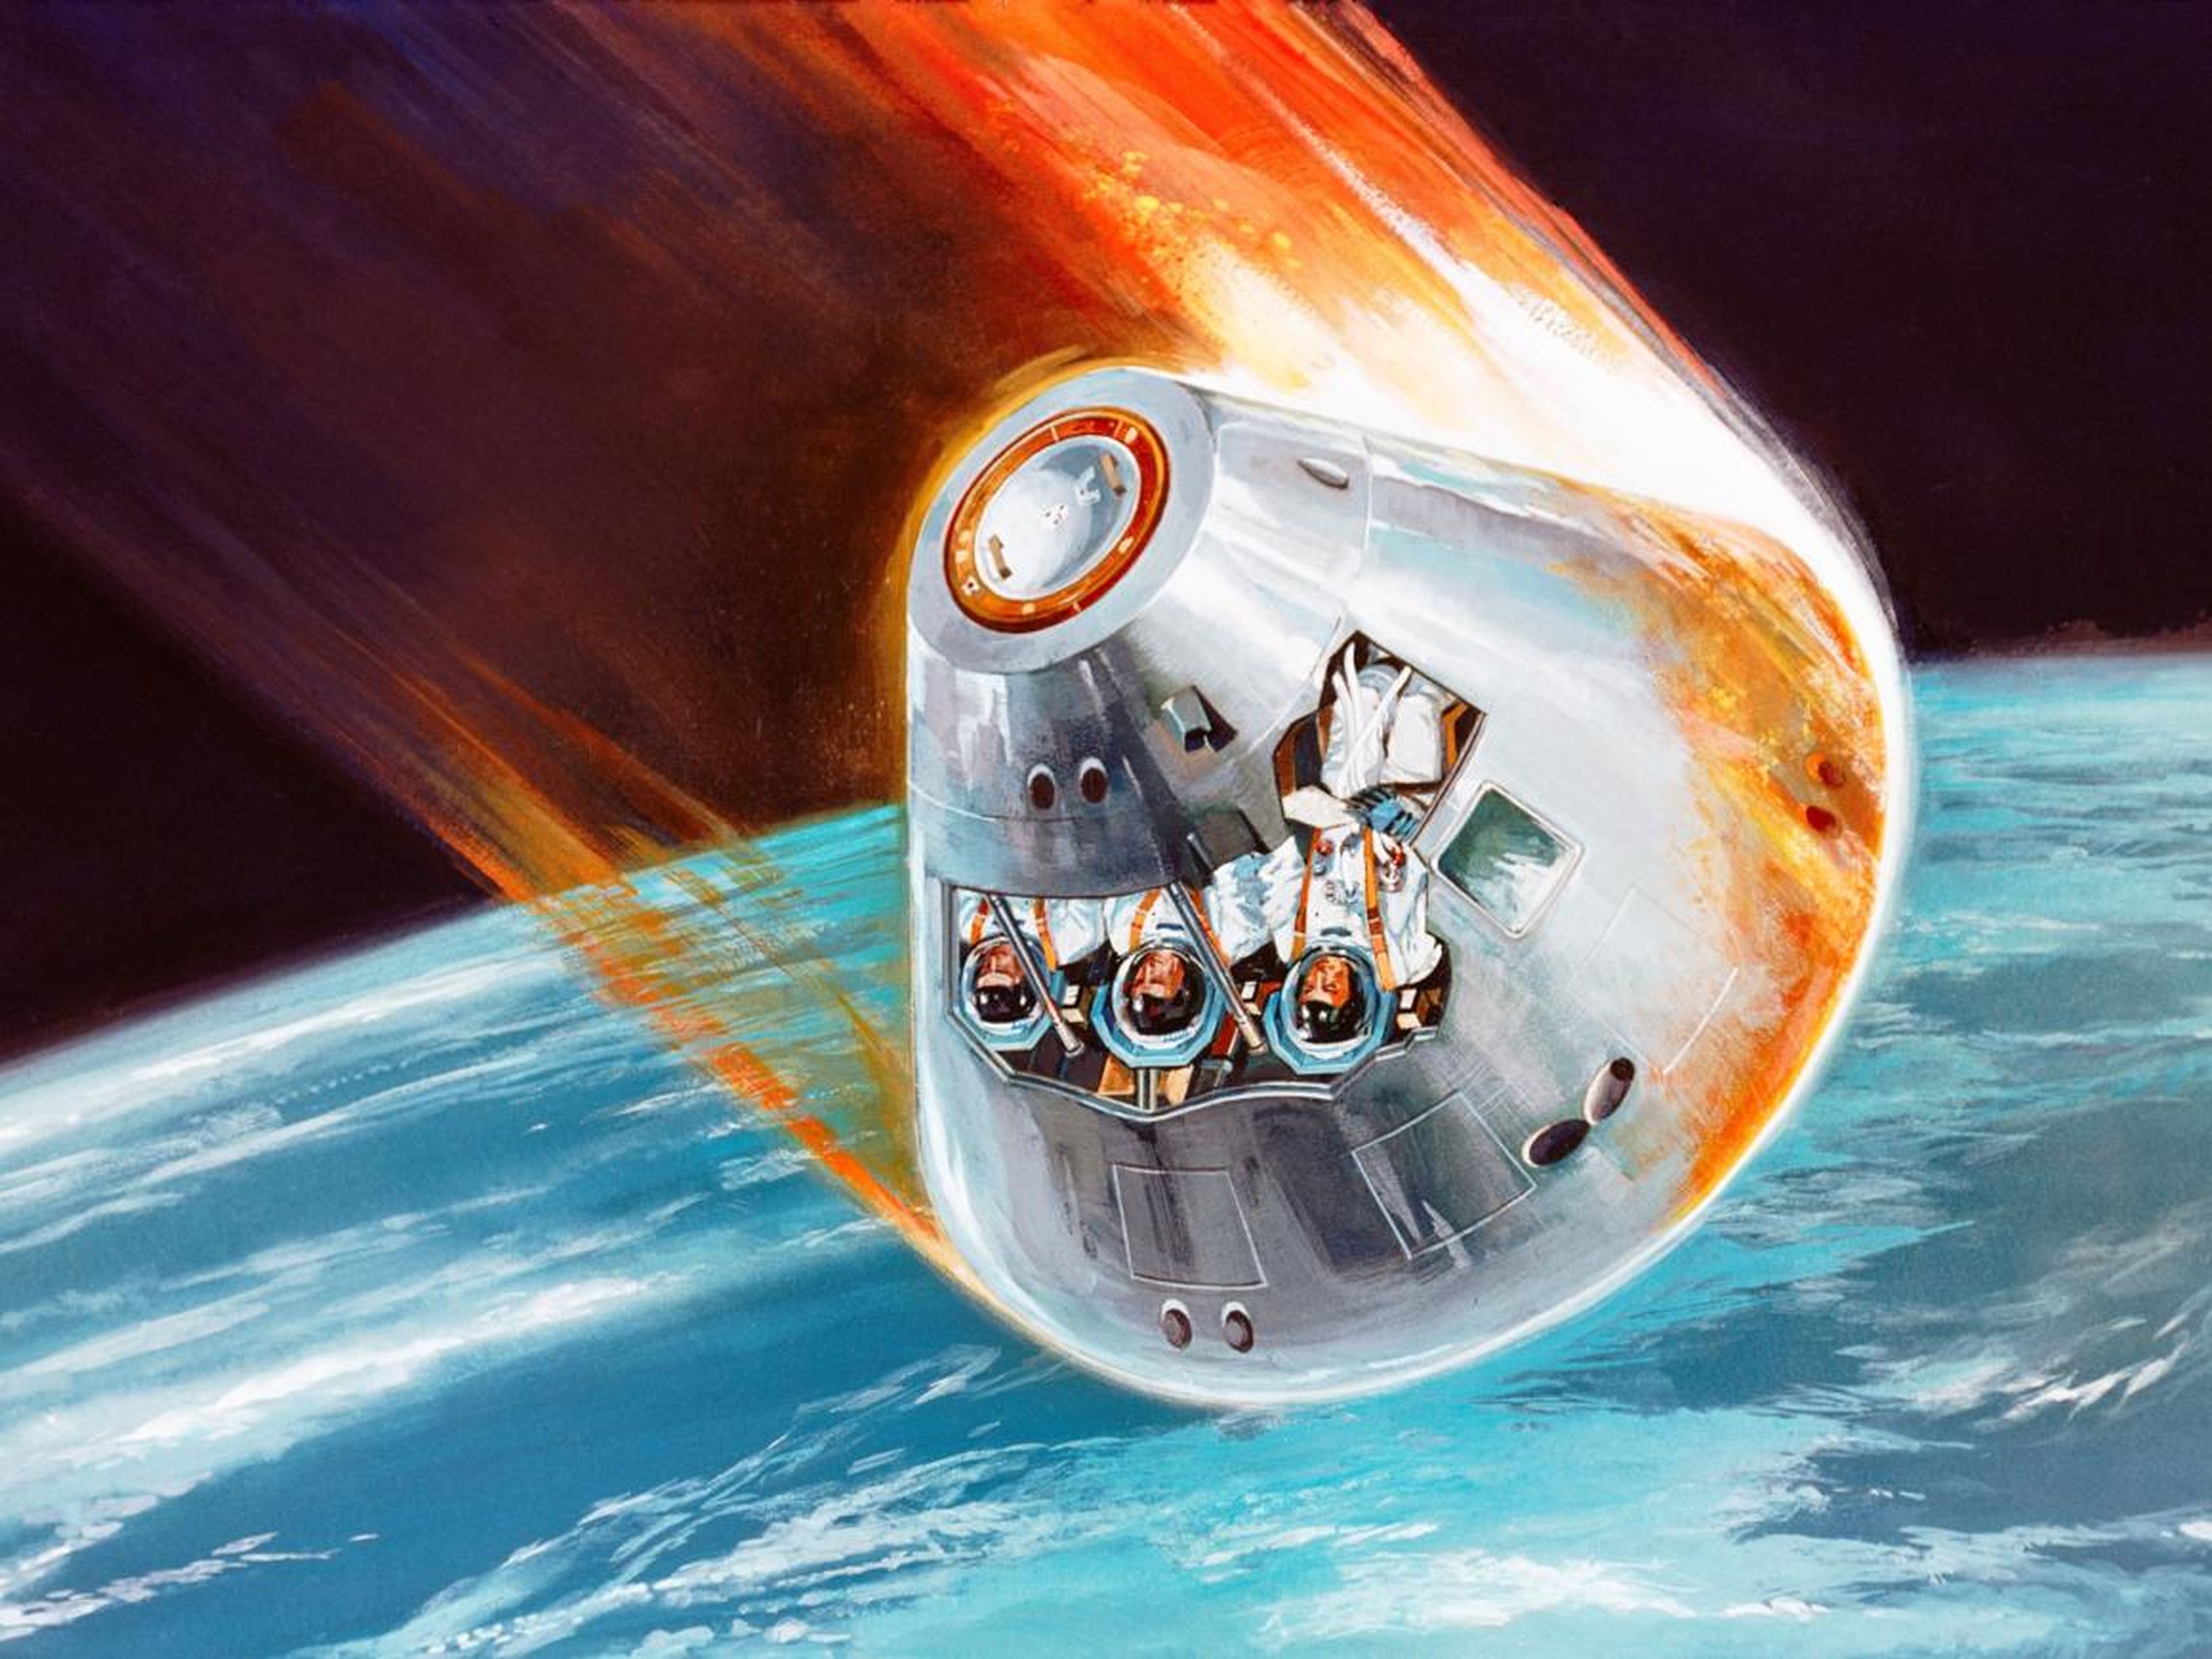 A 1968 artist's concept of an Apollo command module returning to Earth after a voyage to the moon. Plasma is created ahead of a spacecraft's heat shield as it rams through the planet's atmosphere.